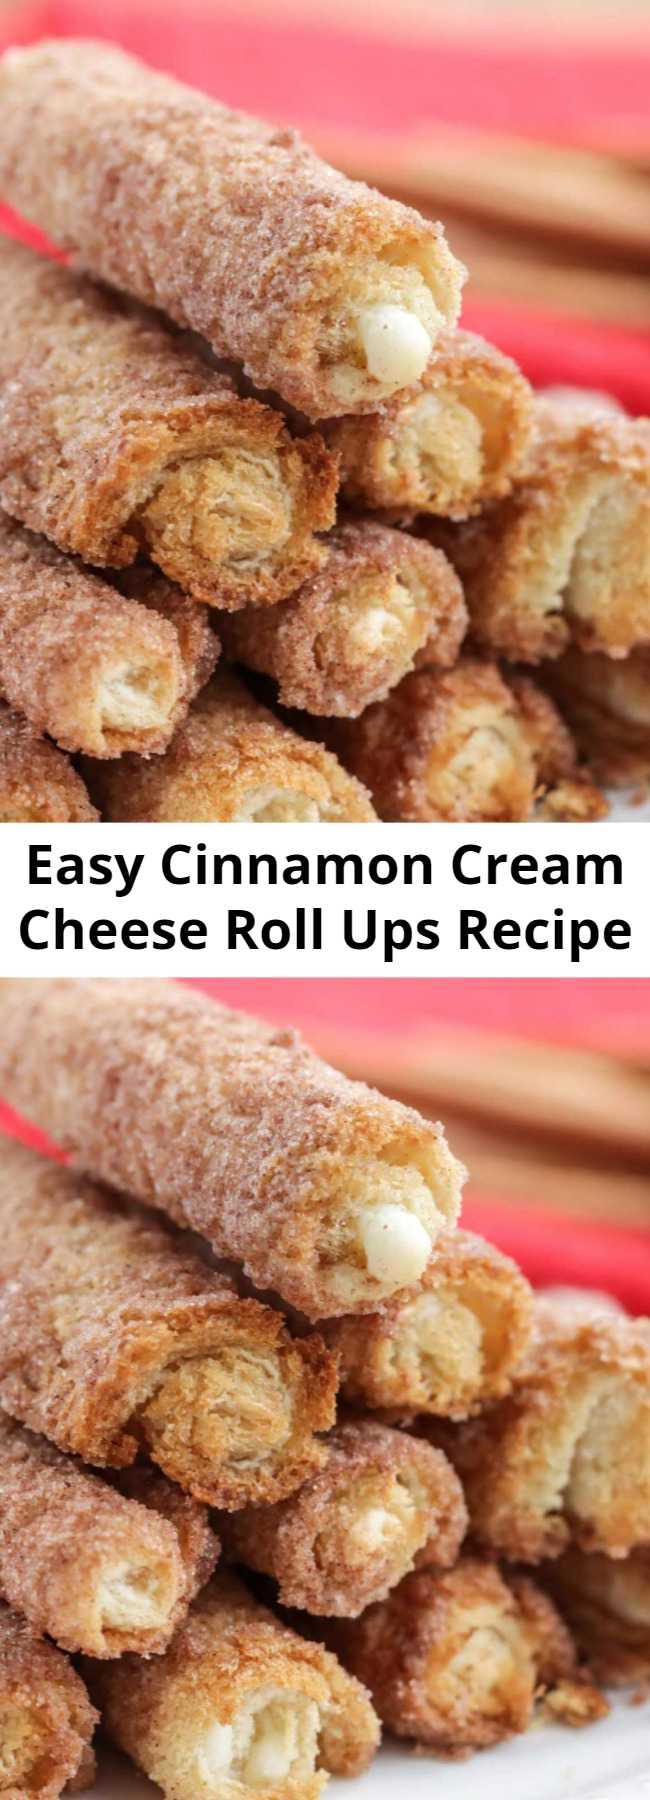 Easy Cinnamon Cream Cheese Roll Ups Recipe - Delicious Cinnamon Cream Cheese Roll-Ups - a simple and yummy breakfast treat. White bread flattened and rolled with a cream cheese and powdered sugar mixture, dipped in butter, cinnamon, and sugar!